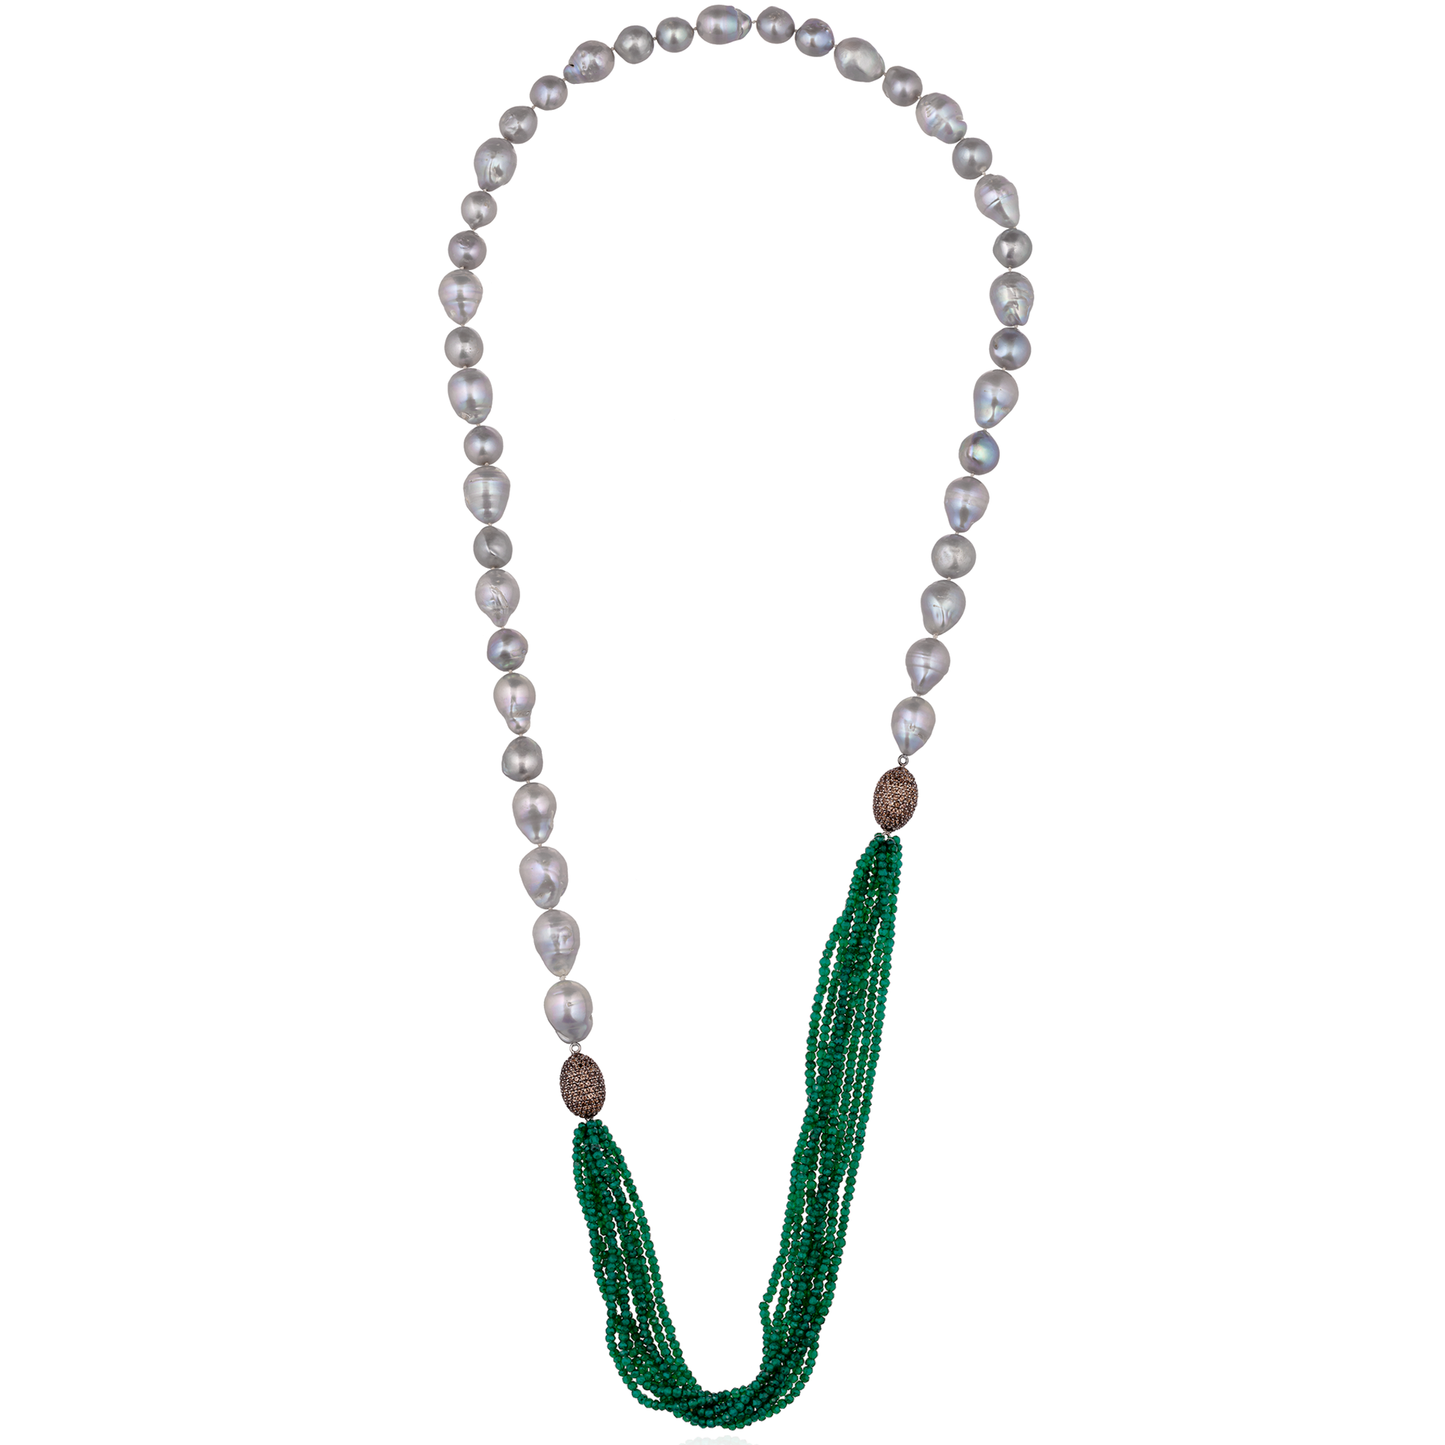 Long Freshwater Pearls Necklace with Green Onyx Strands